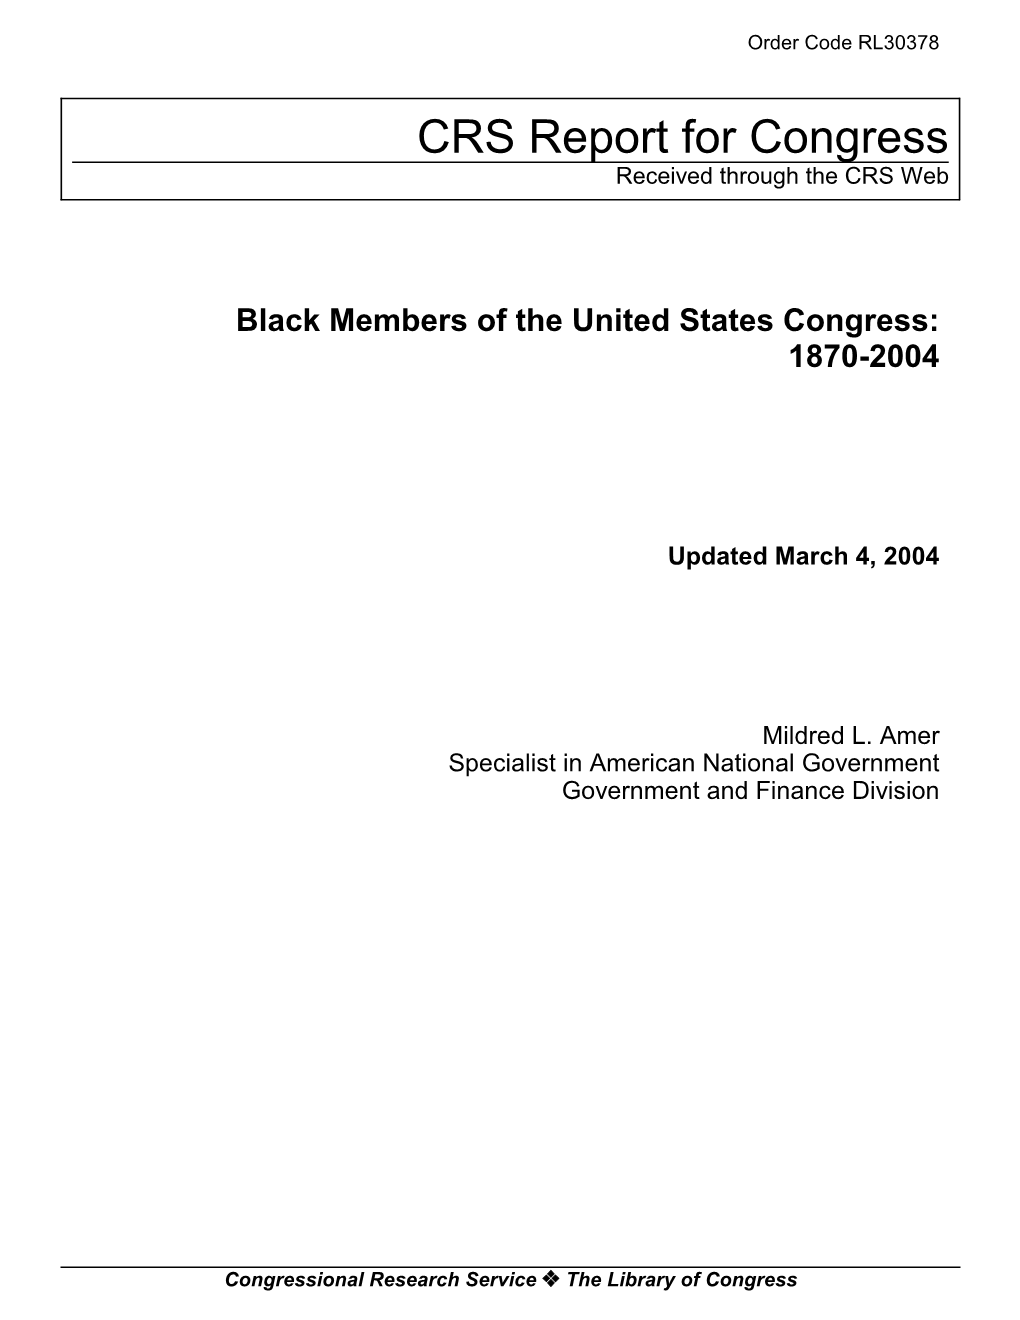 Black Members of the United States Congress: 1870-2004